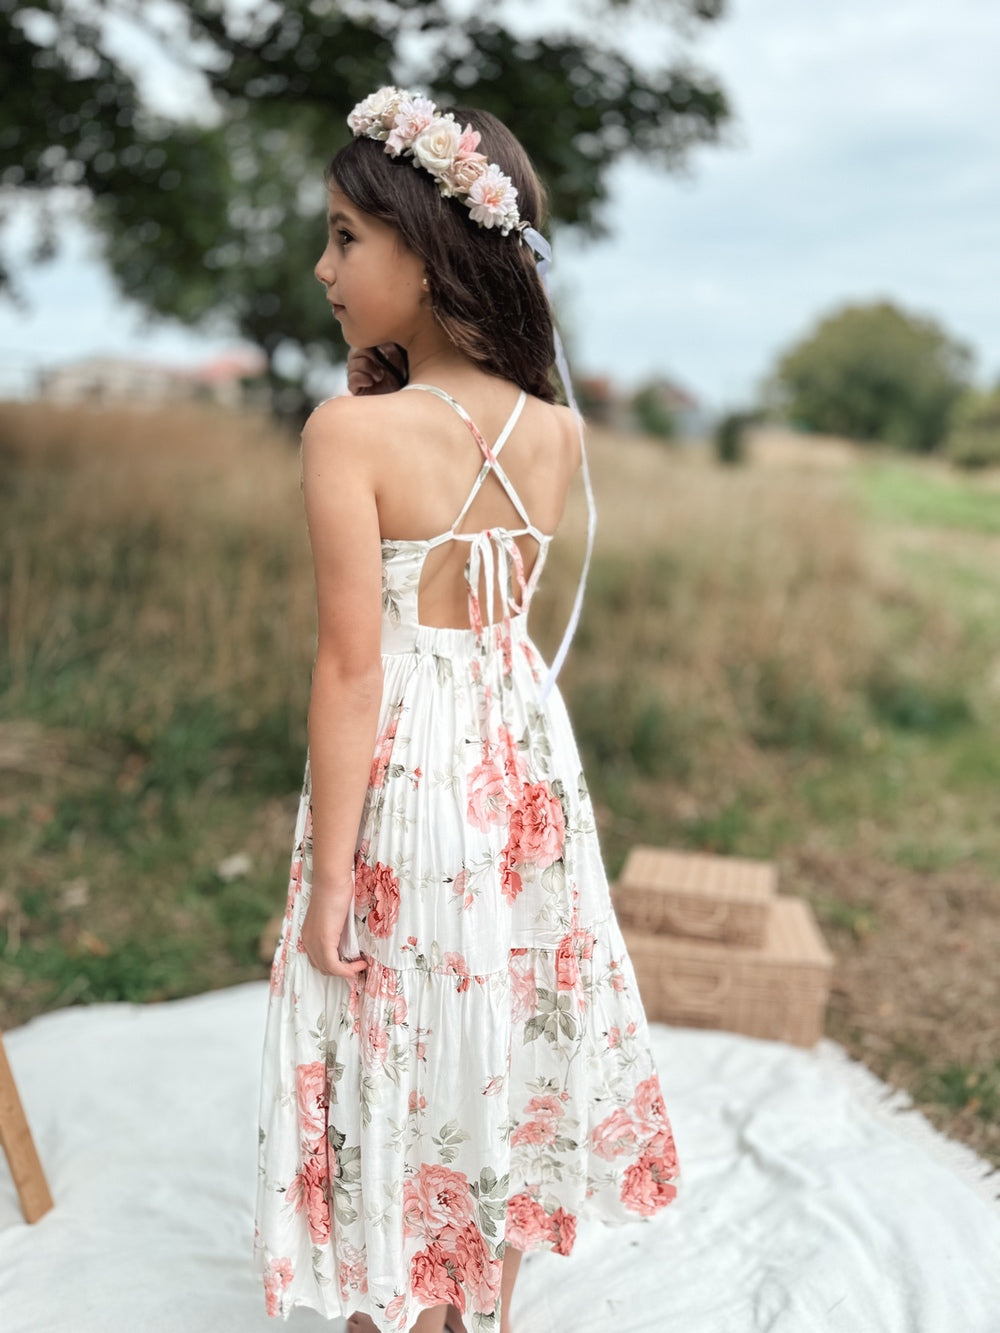 Ava Girls Floral Maxi Dress - All Products